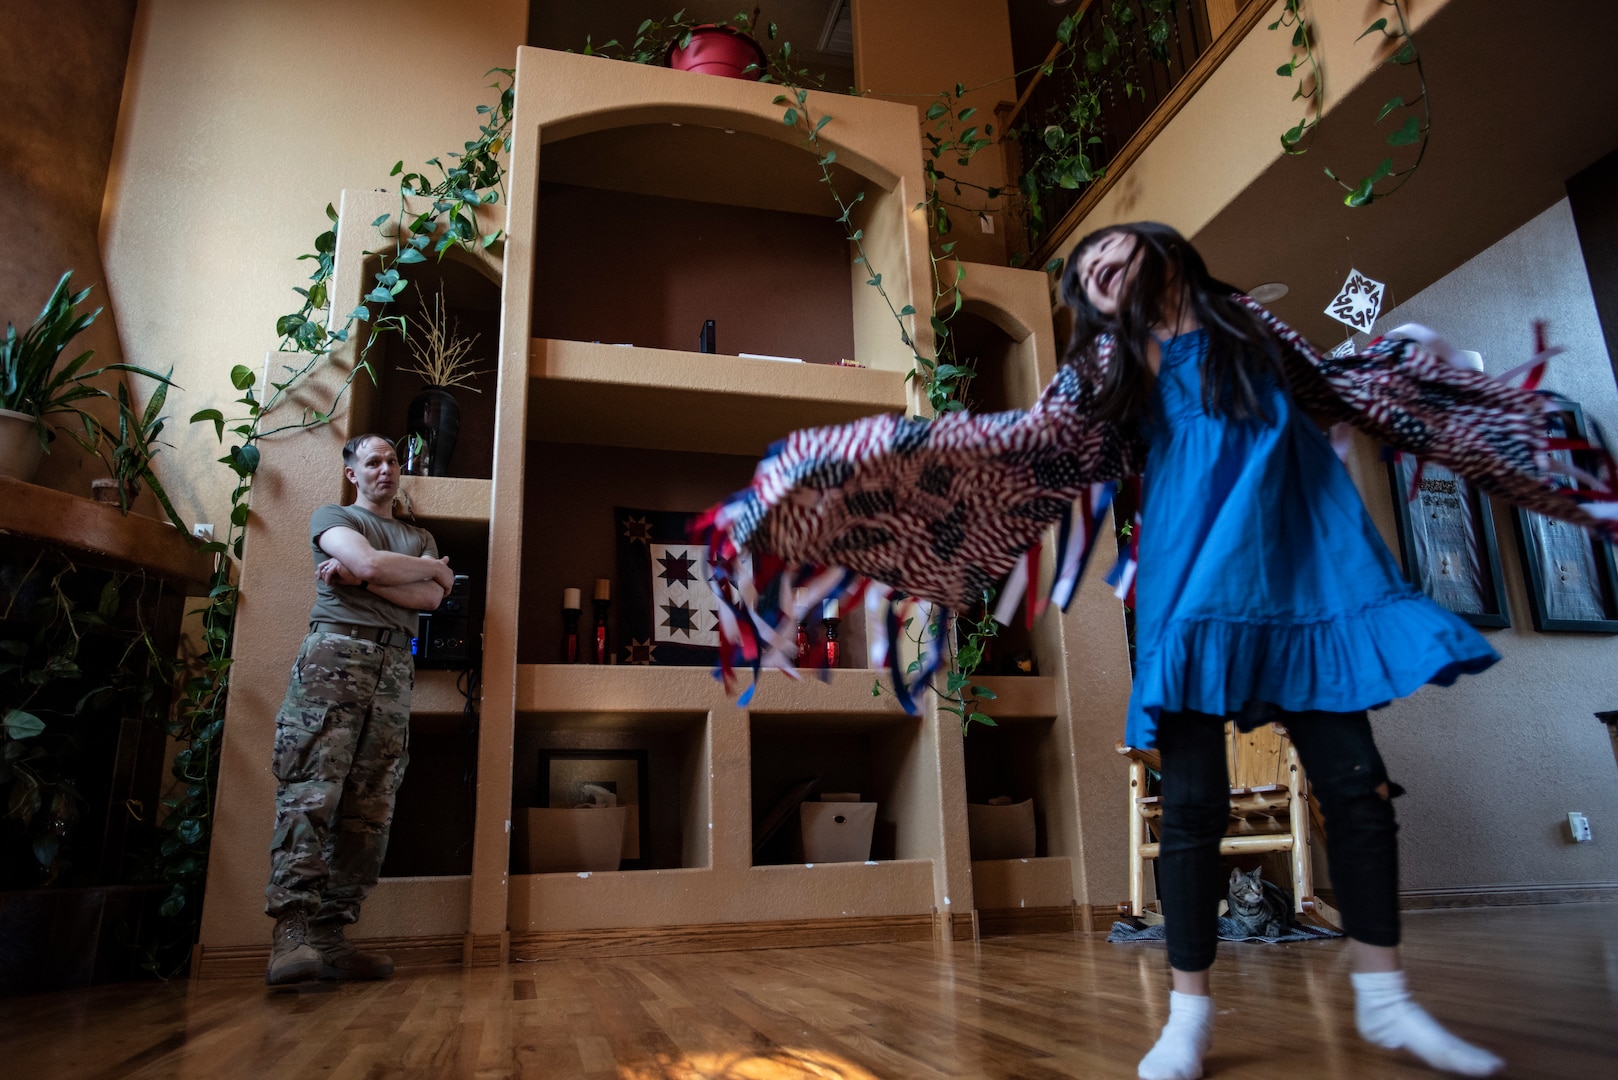 Sgt. 1st Class Mike Beck’s daughter practices traditional Lakota dance at their home April 21, 2021, in Rapid City South Dakota. Michael, an operations NCO, and his wife, Emily, a cultural resources program manager, both with the South Dakota National Guard, have cared for more than two dozen children and adopted seven Lakota children.